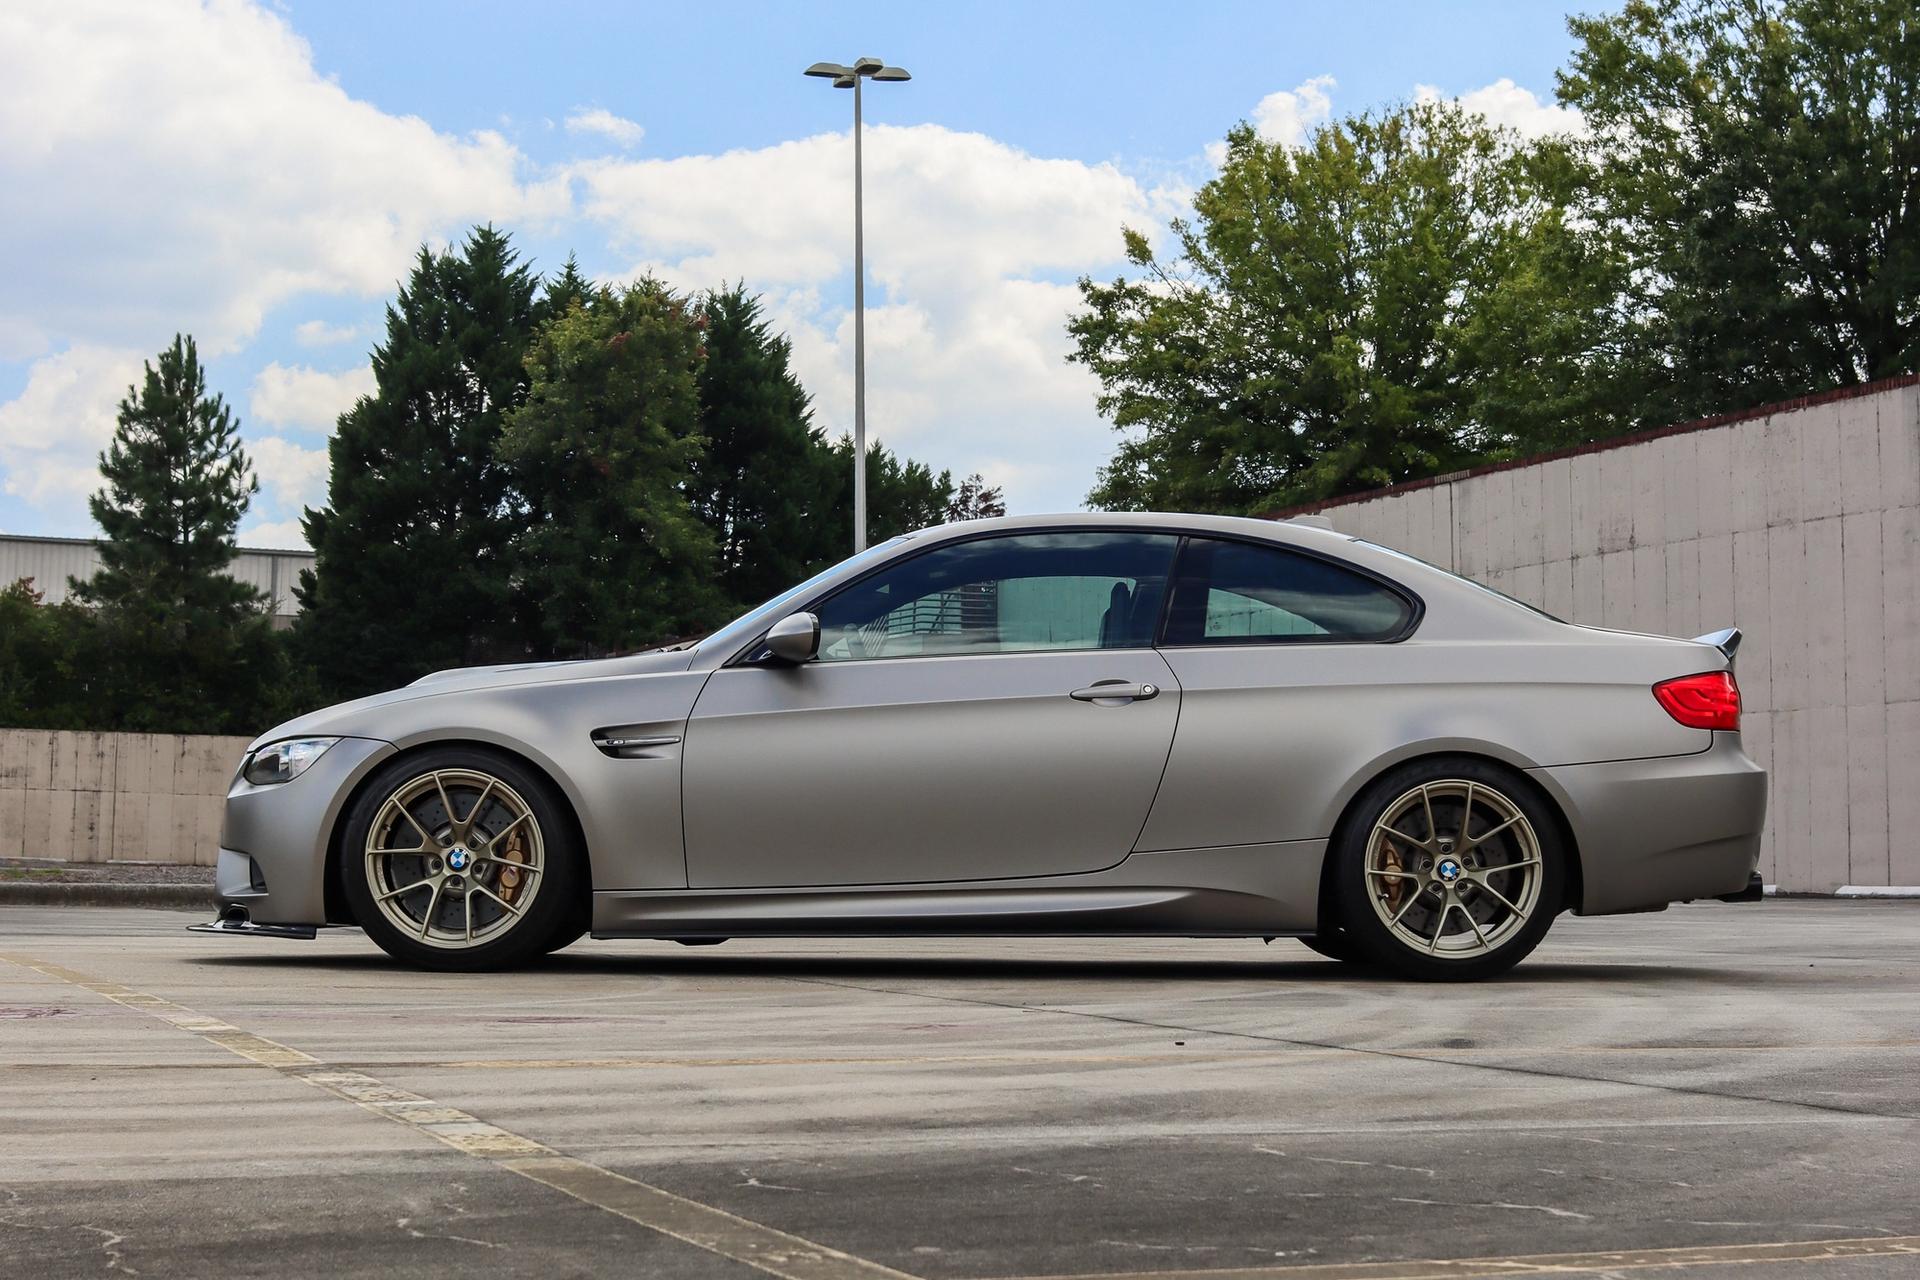 BMW E92 Coupe M3 with 18 VS-5RS in Motorsport Gold on BMW E90 E92